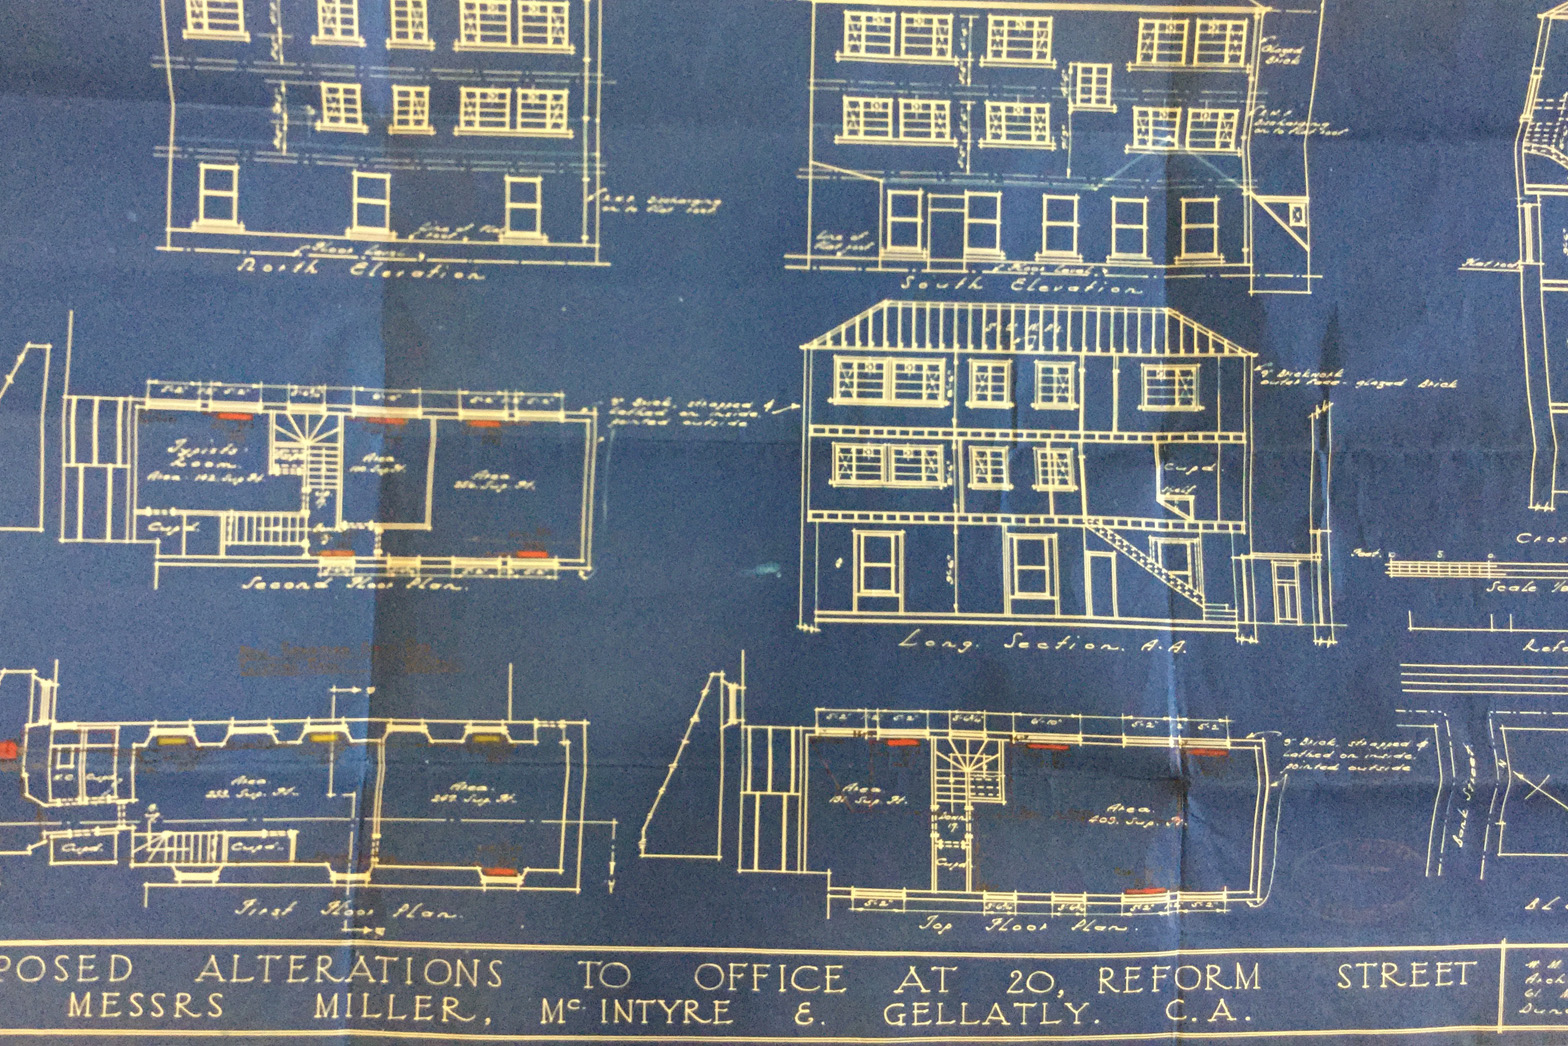 blueprint showing the refurb of the Reform Street branch